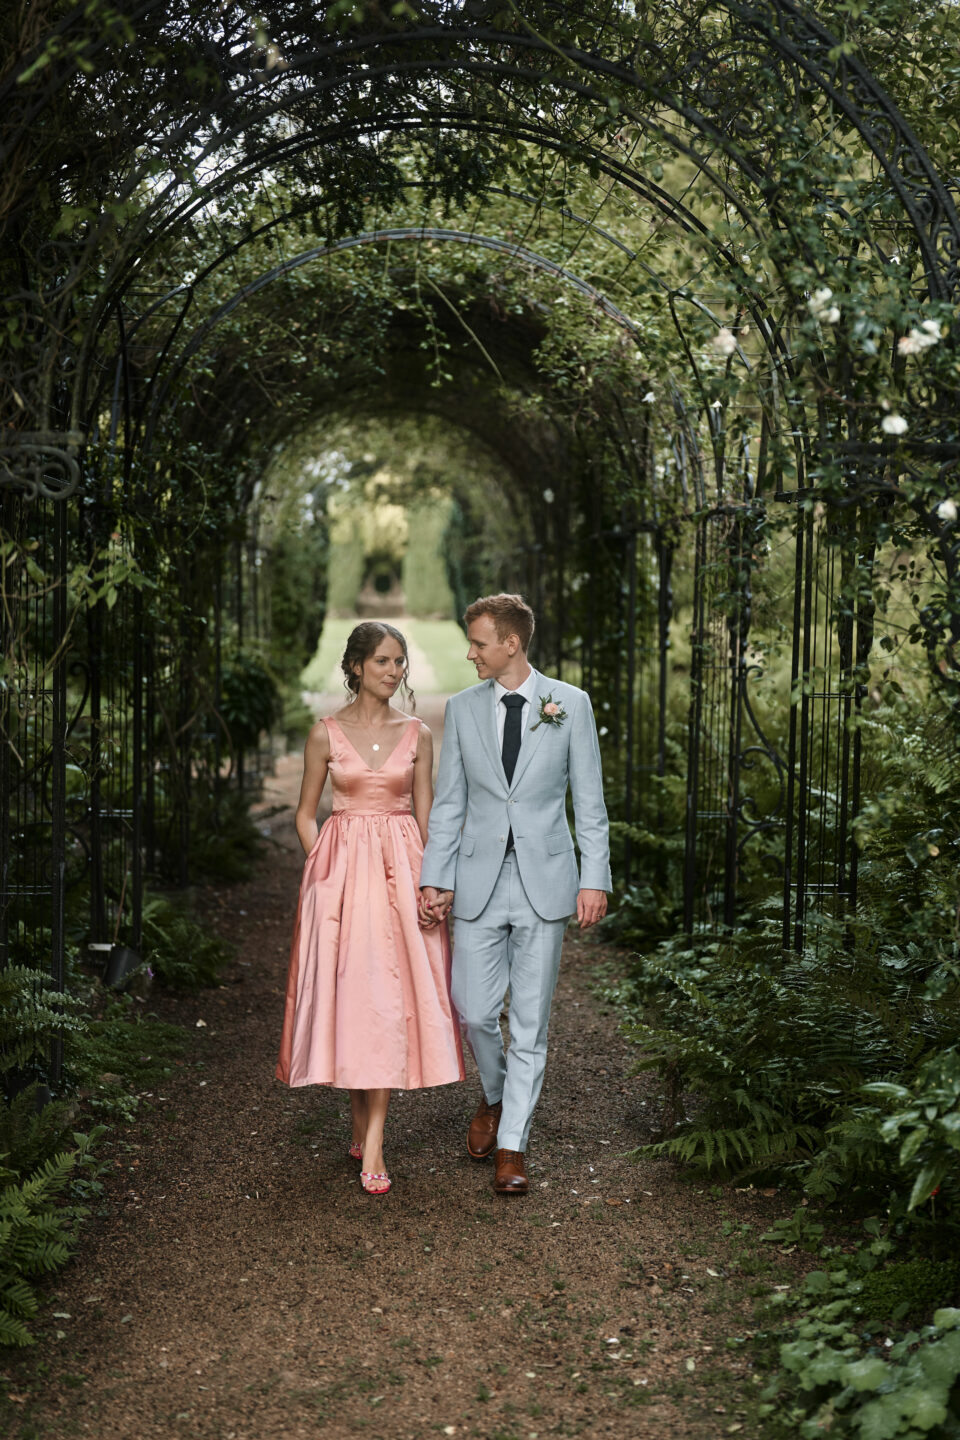 A man and woman getting married are walking under a garden arch.